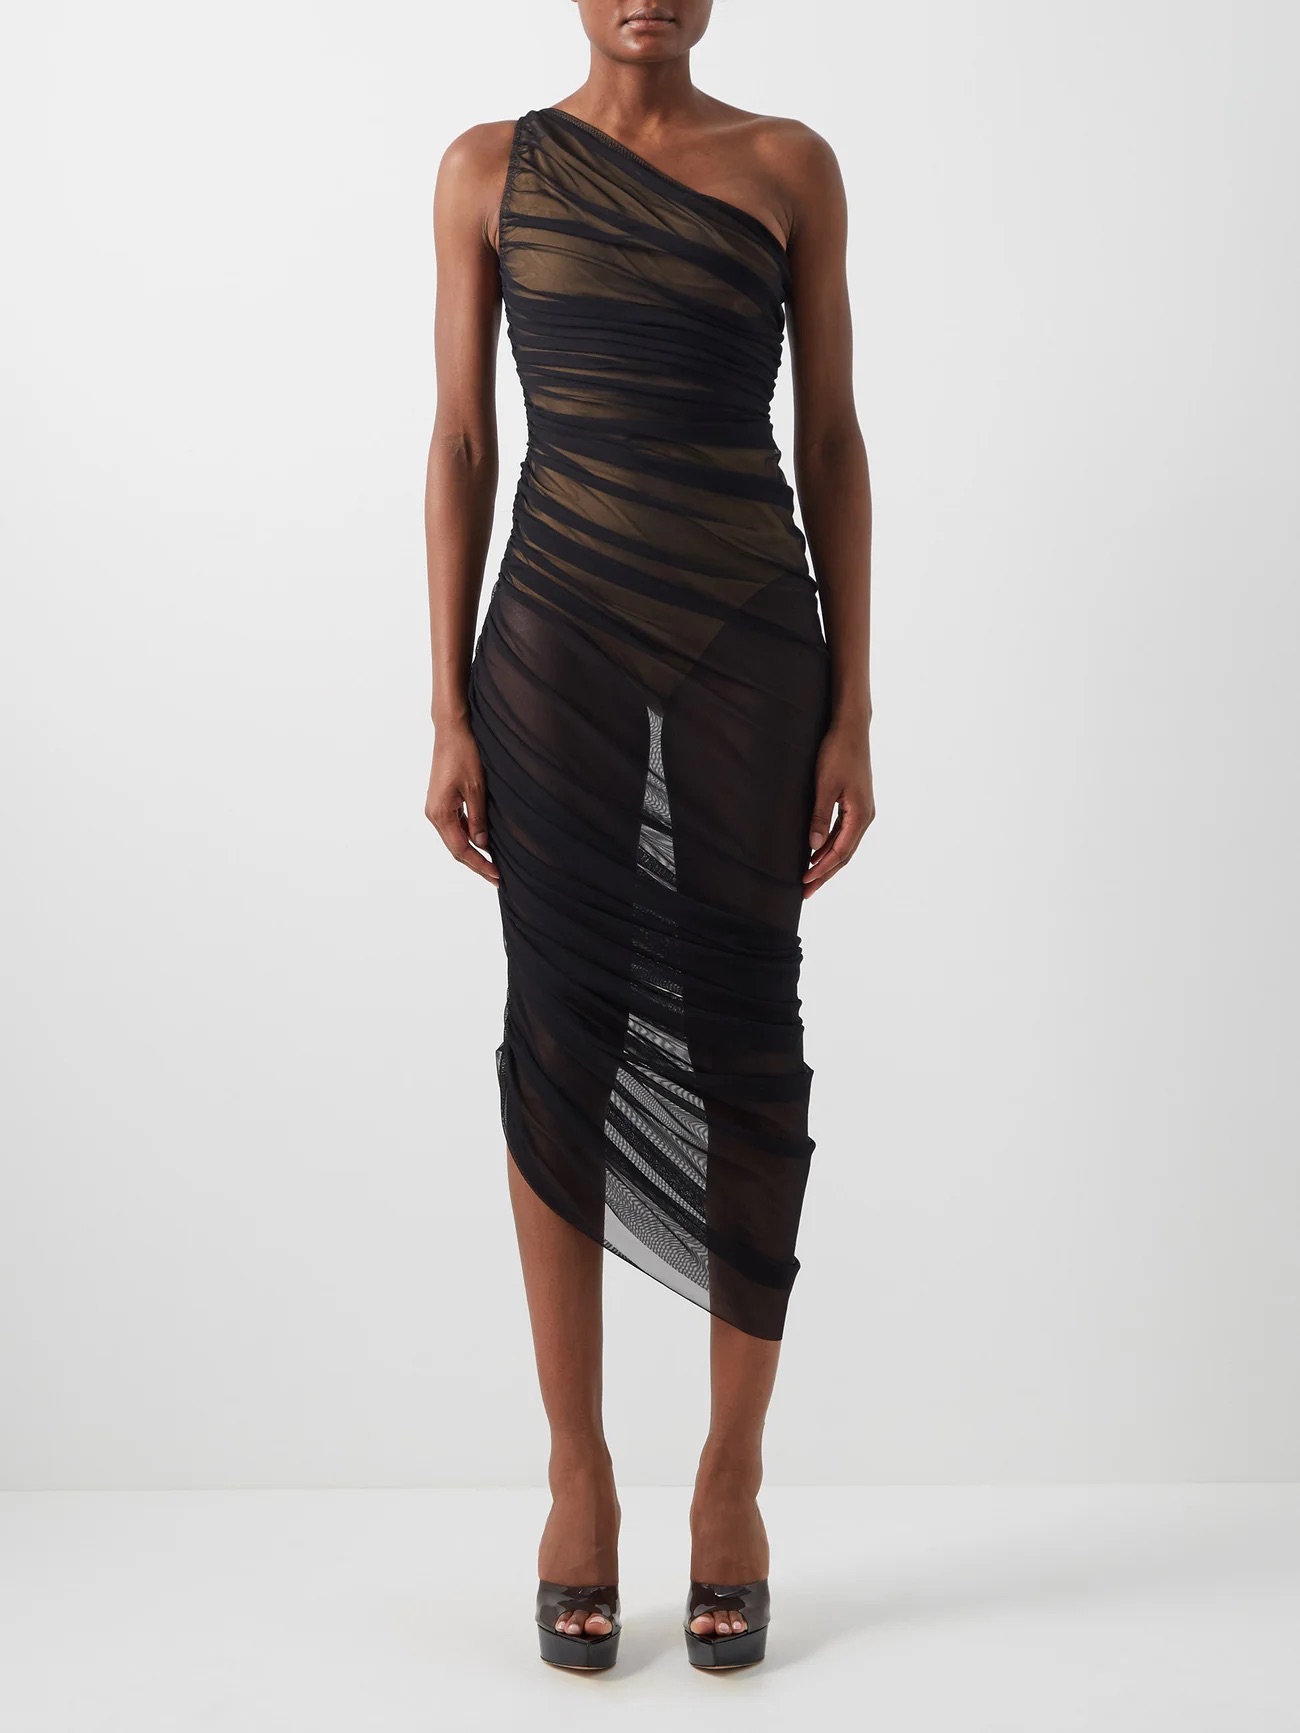 Norma Kamali's Diana Dress Has Reached Icon Status | Who What Wear UK